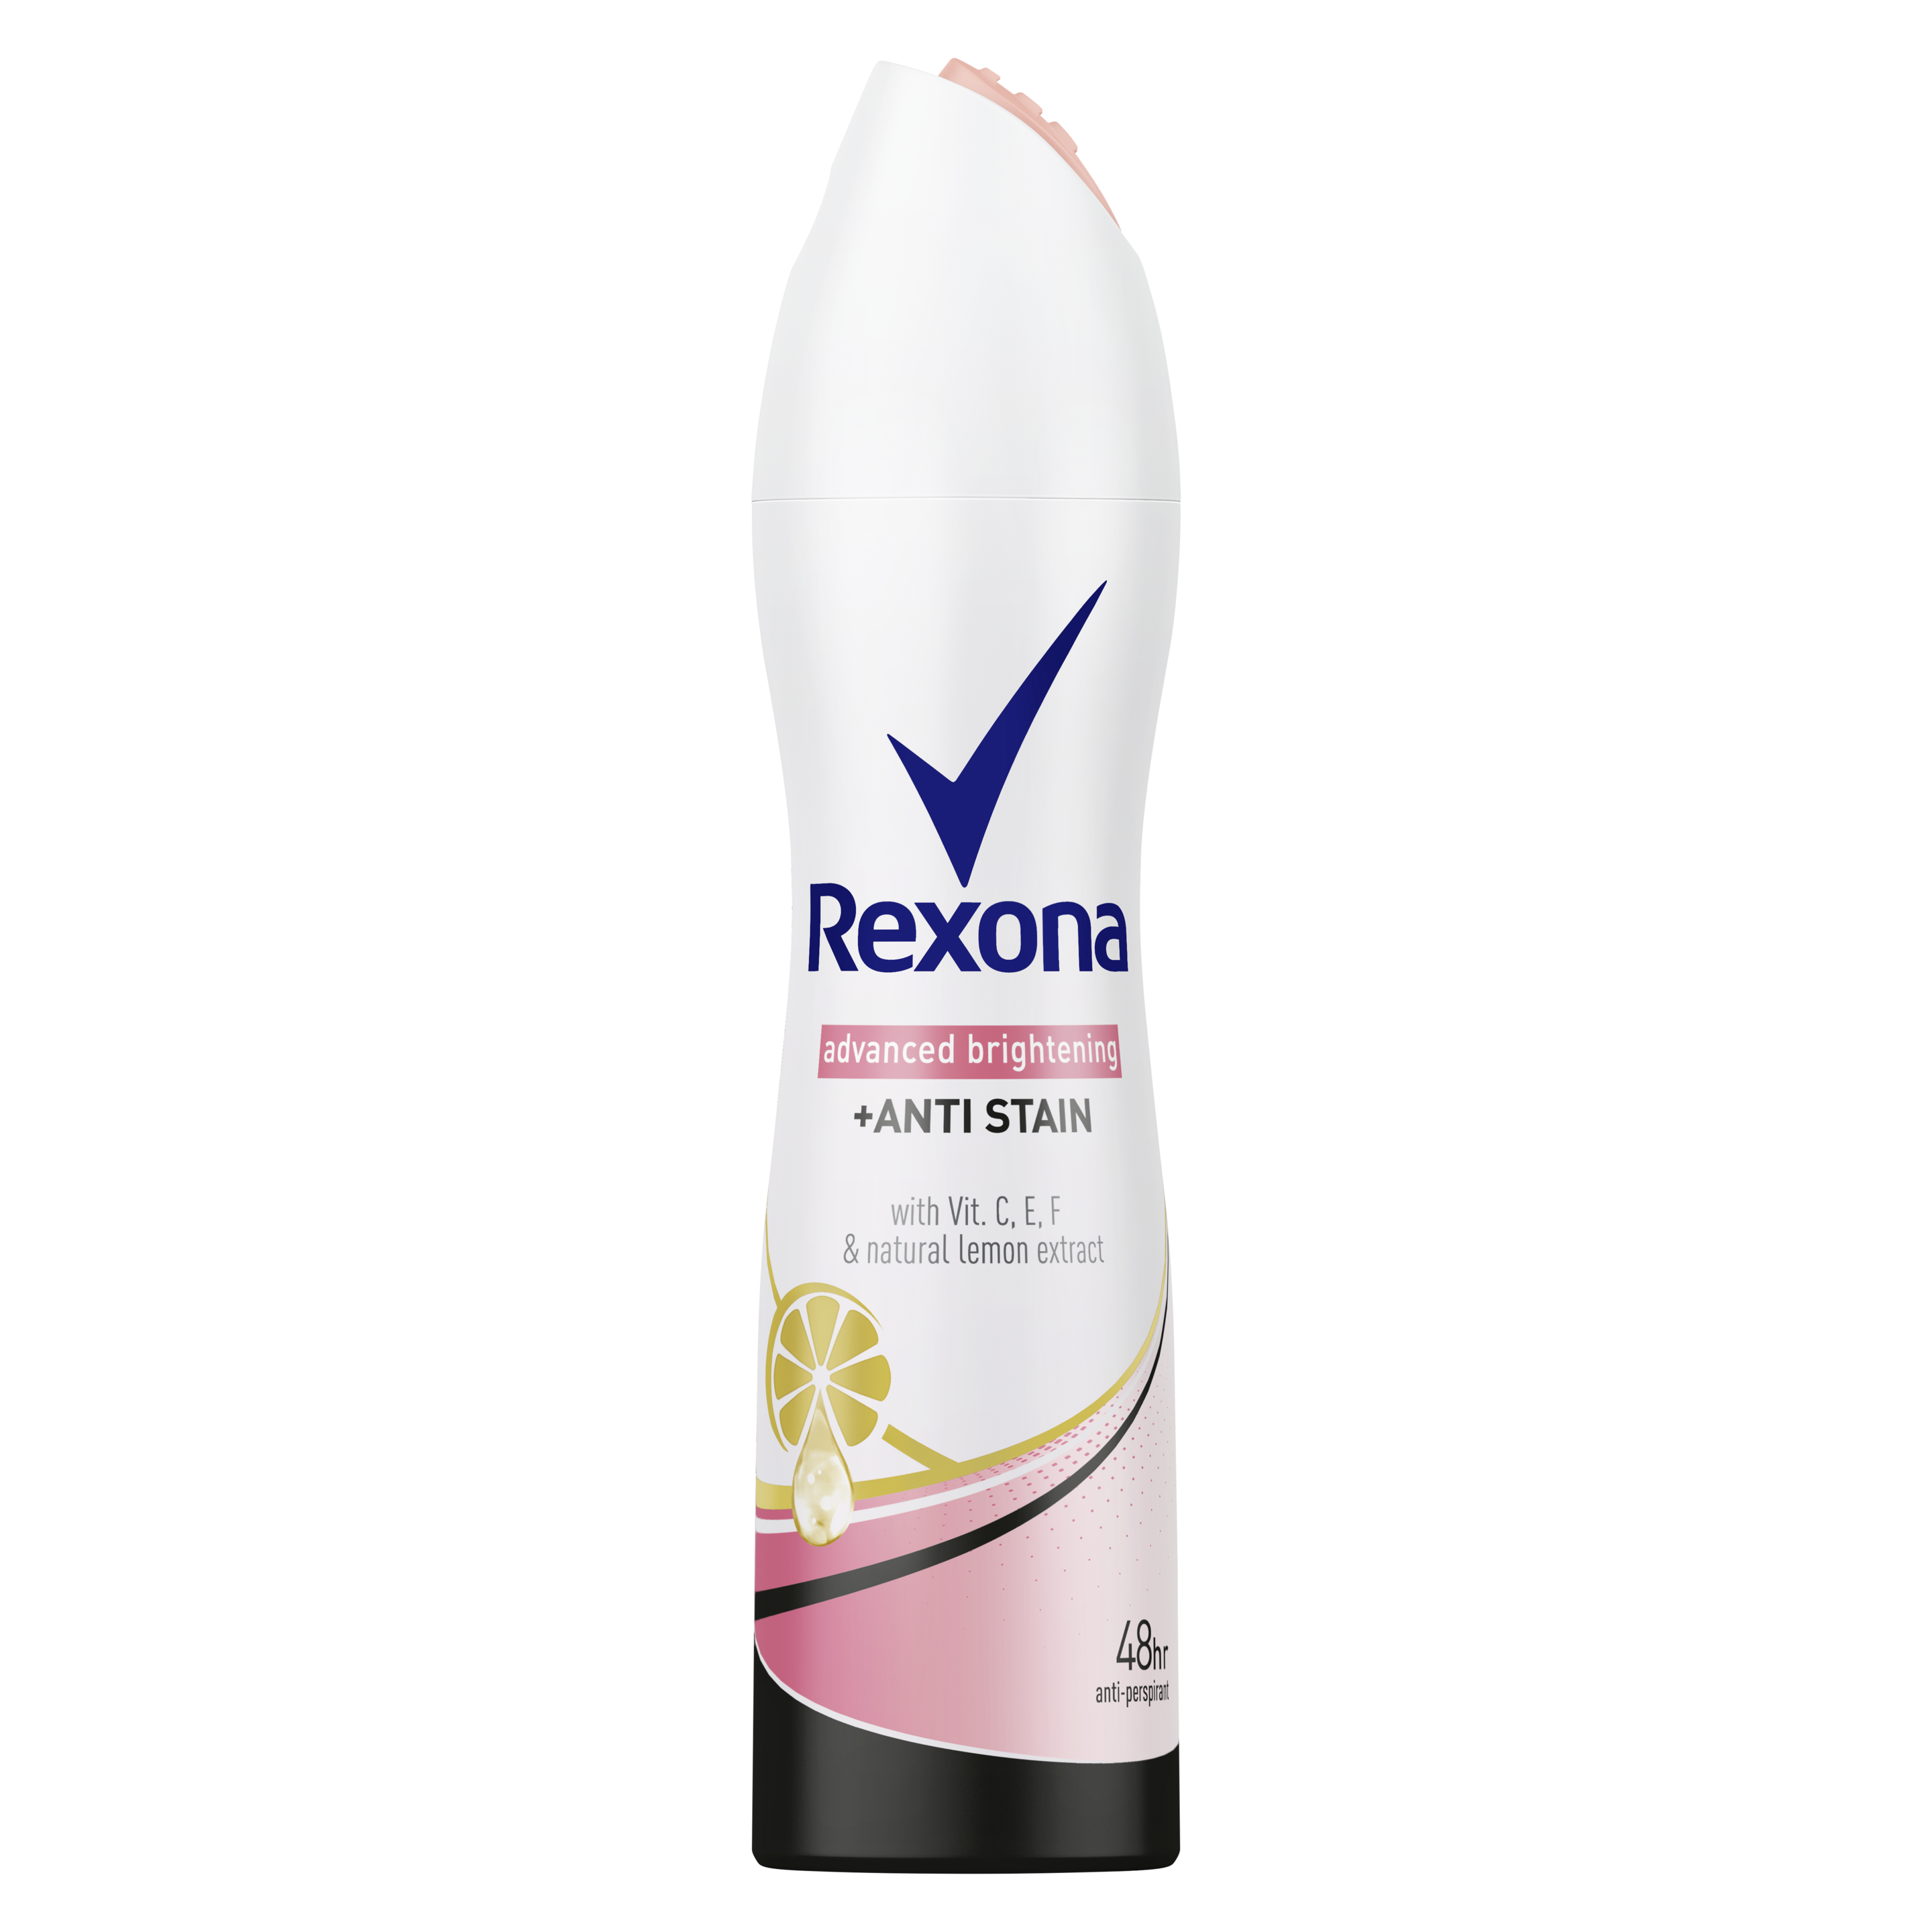 Rexona Advanced Brightening + Anti Stain Deodorant Roll-On | Home Page